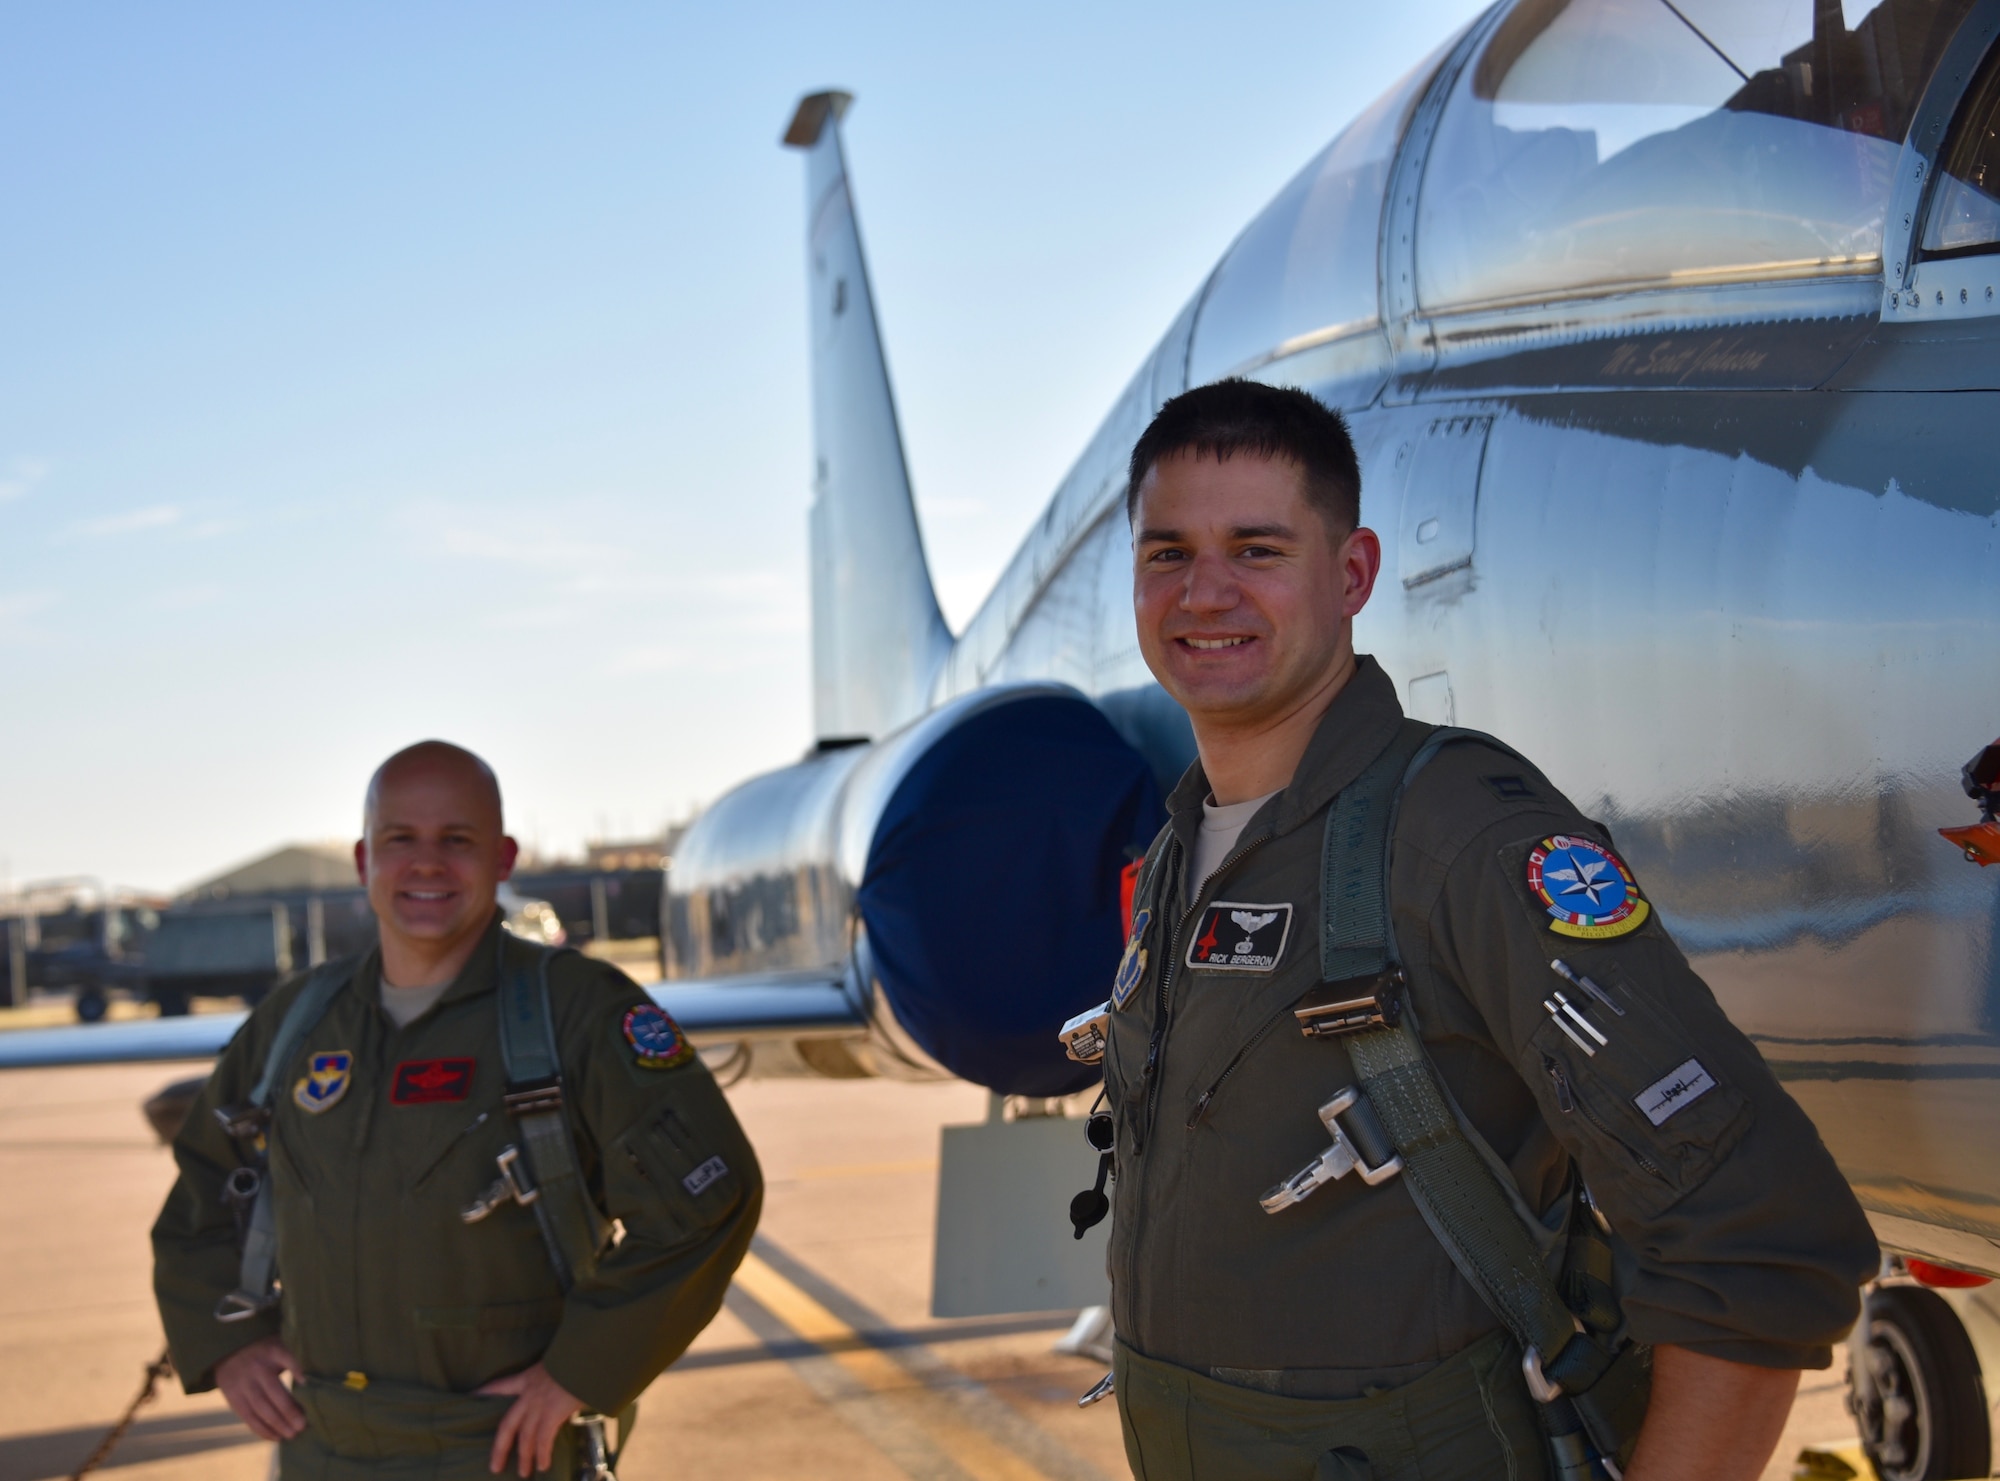 Lt. Col. Adam Markel, left, a seasoned F-16 seasoned fighter pilot, and Capt. Richard Bergeron, an Introduction to Fighter Fundamentals instructor pilot, pose for a photo at Sheppard Air Force Base, Texas, Nov. 18, 2020. Bergeron was 29 which exceeded the age requirement to begin his career in a rated field. Despite this, he decided he still wanted to try to earn a commission and chose to build off of his enlisted experience and become an intelligence officer. (Courtesy Photo)